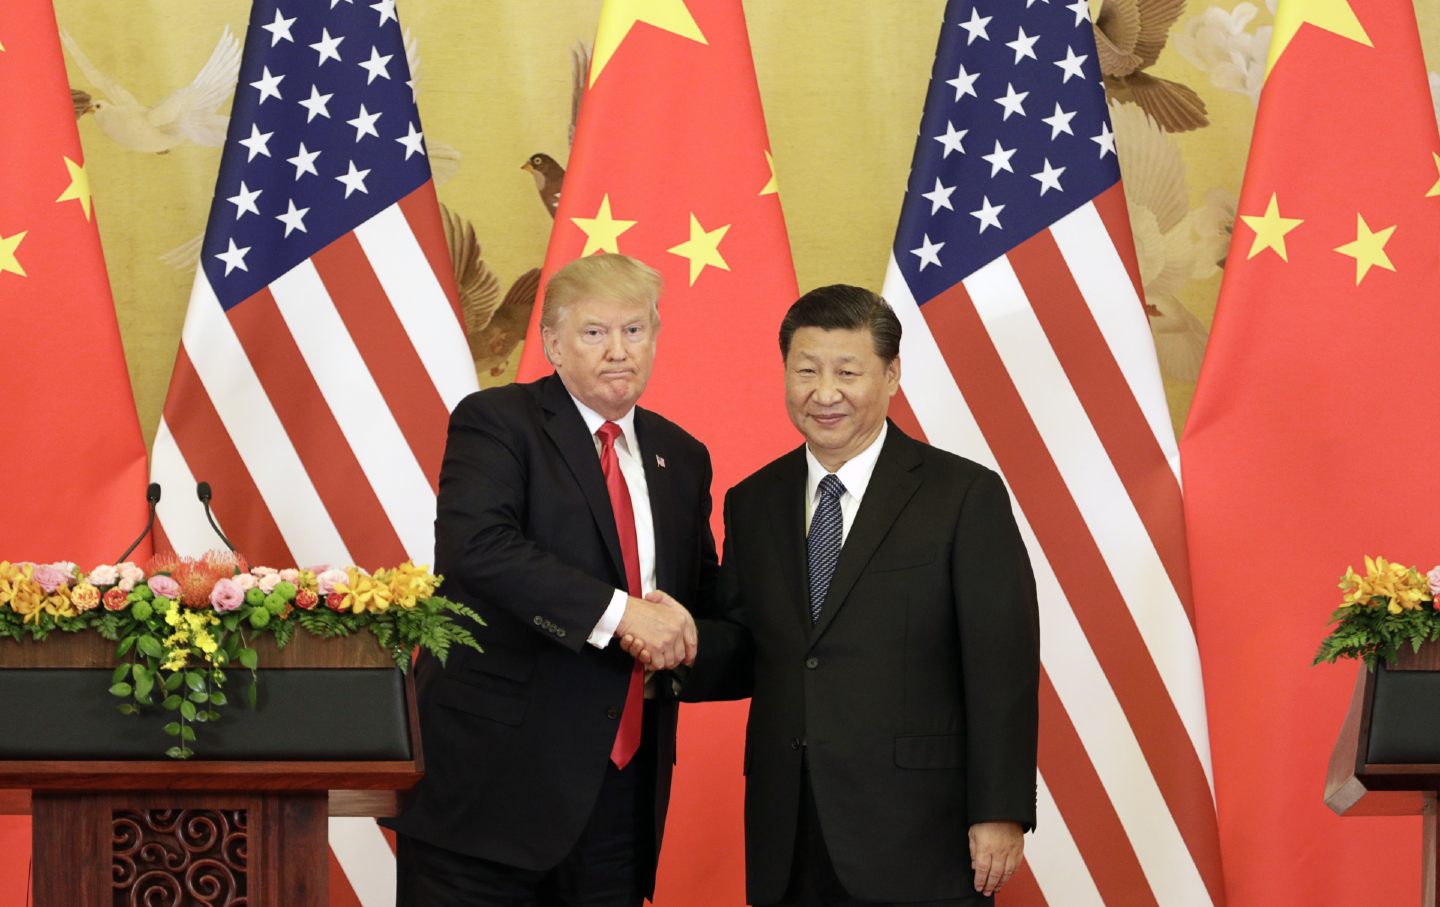 Donald Trump and Chinese President Xi Jinping in 2017. Project 2025 commits the US to a state of permanent belligerence toward China.